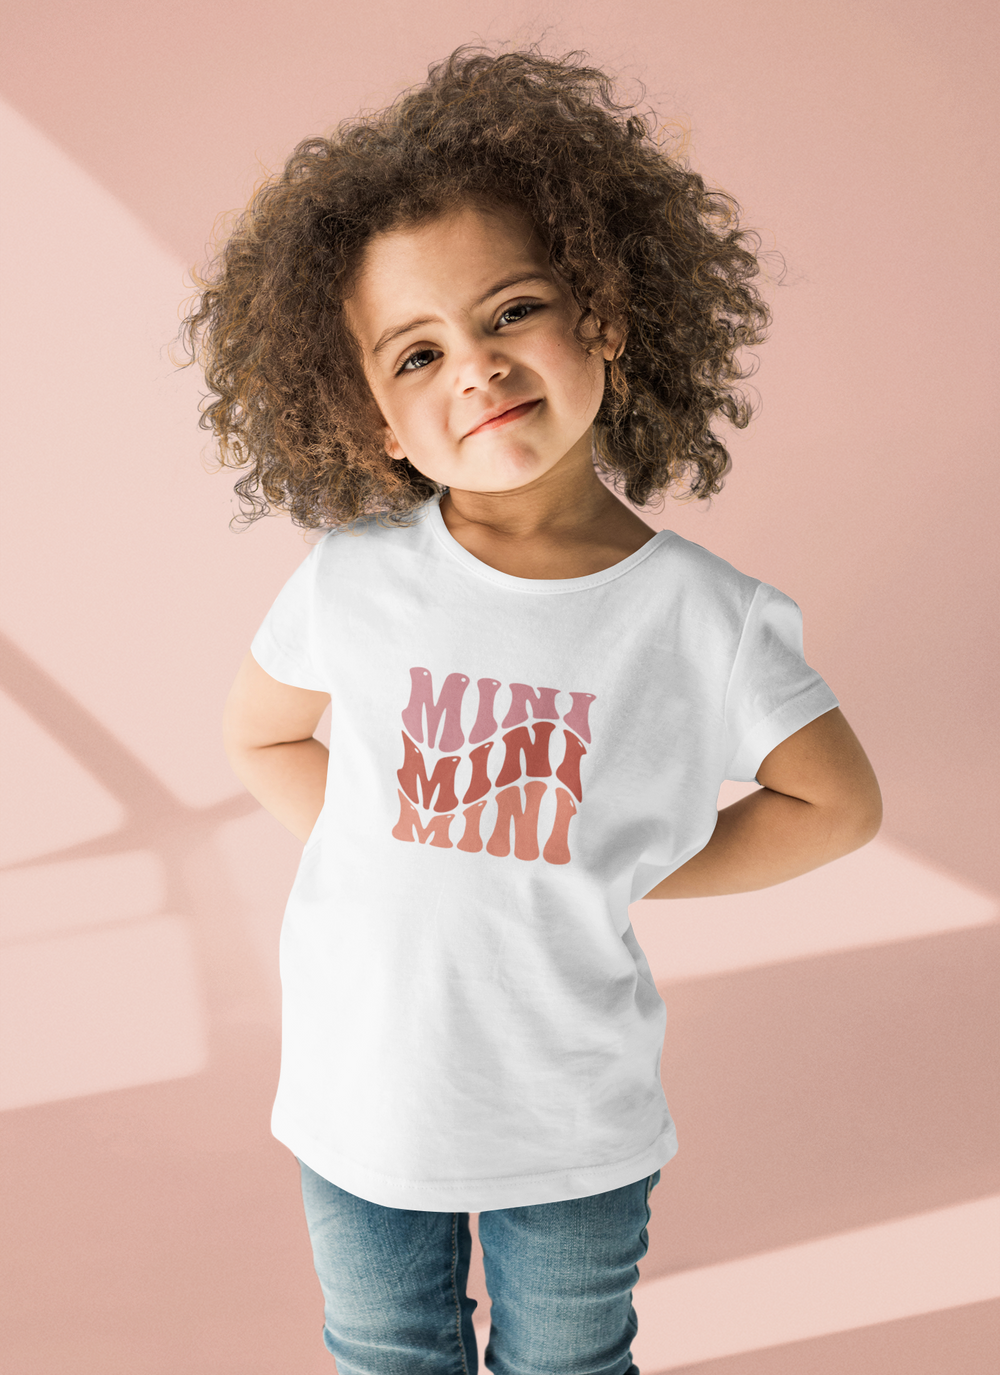 Mini Toddler Tee 31083903900561162147 18 Kids clothes Worlds Worst Tees